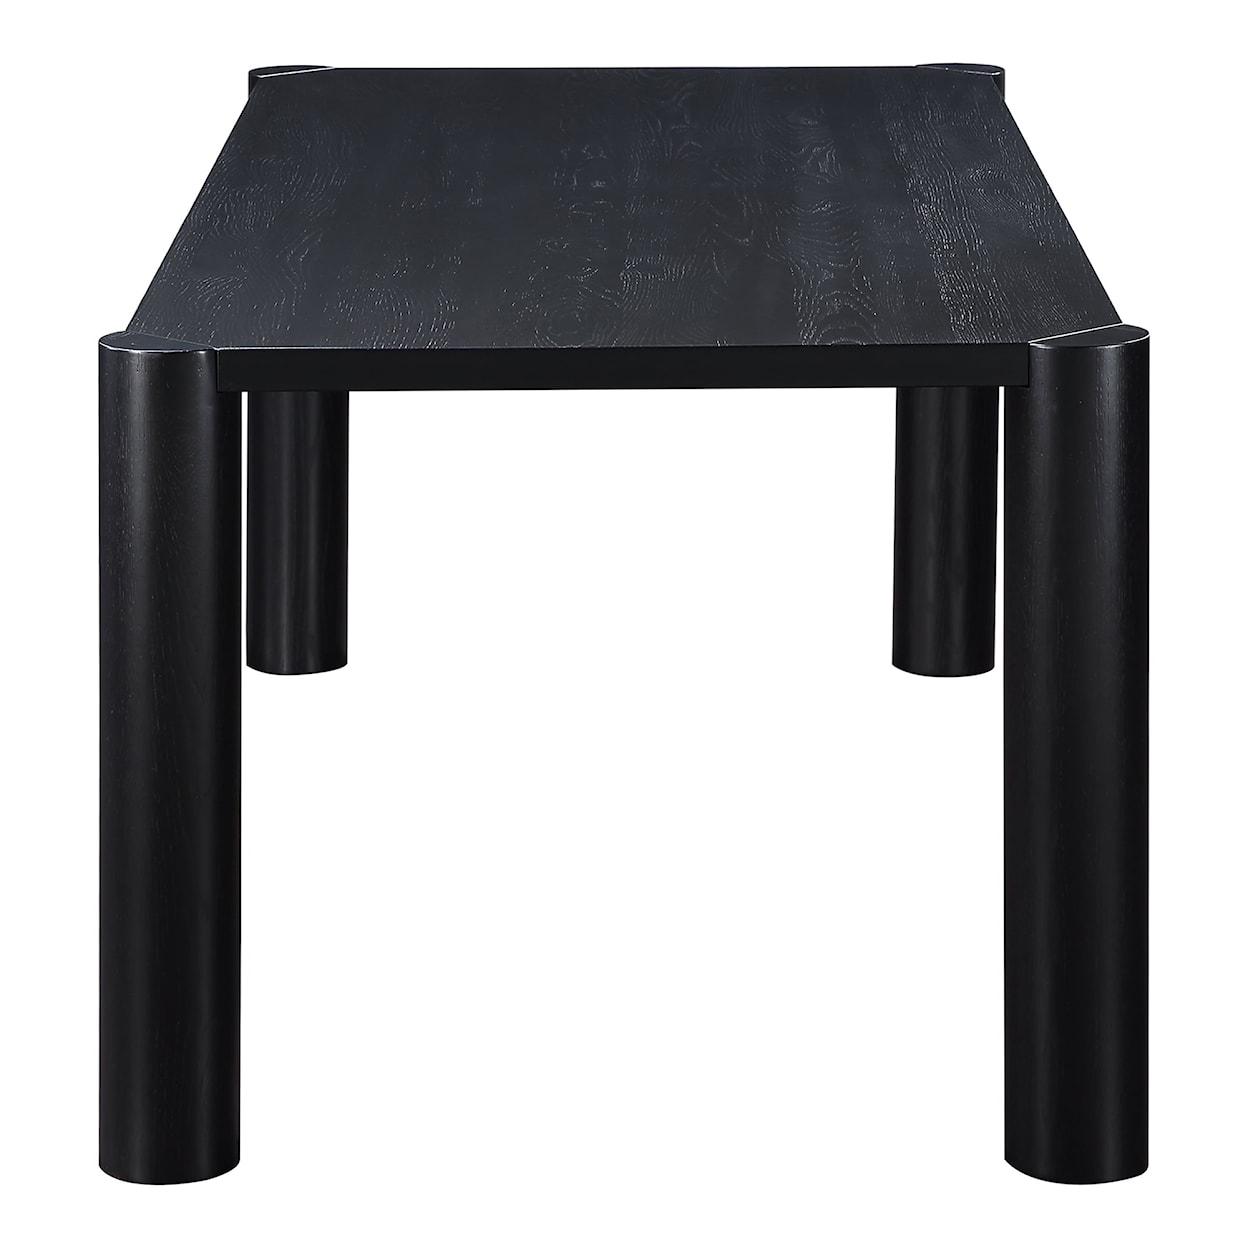 Moe's Home Collection Post Solid Oak Dining Table